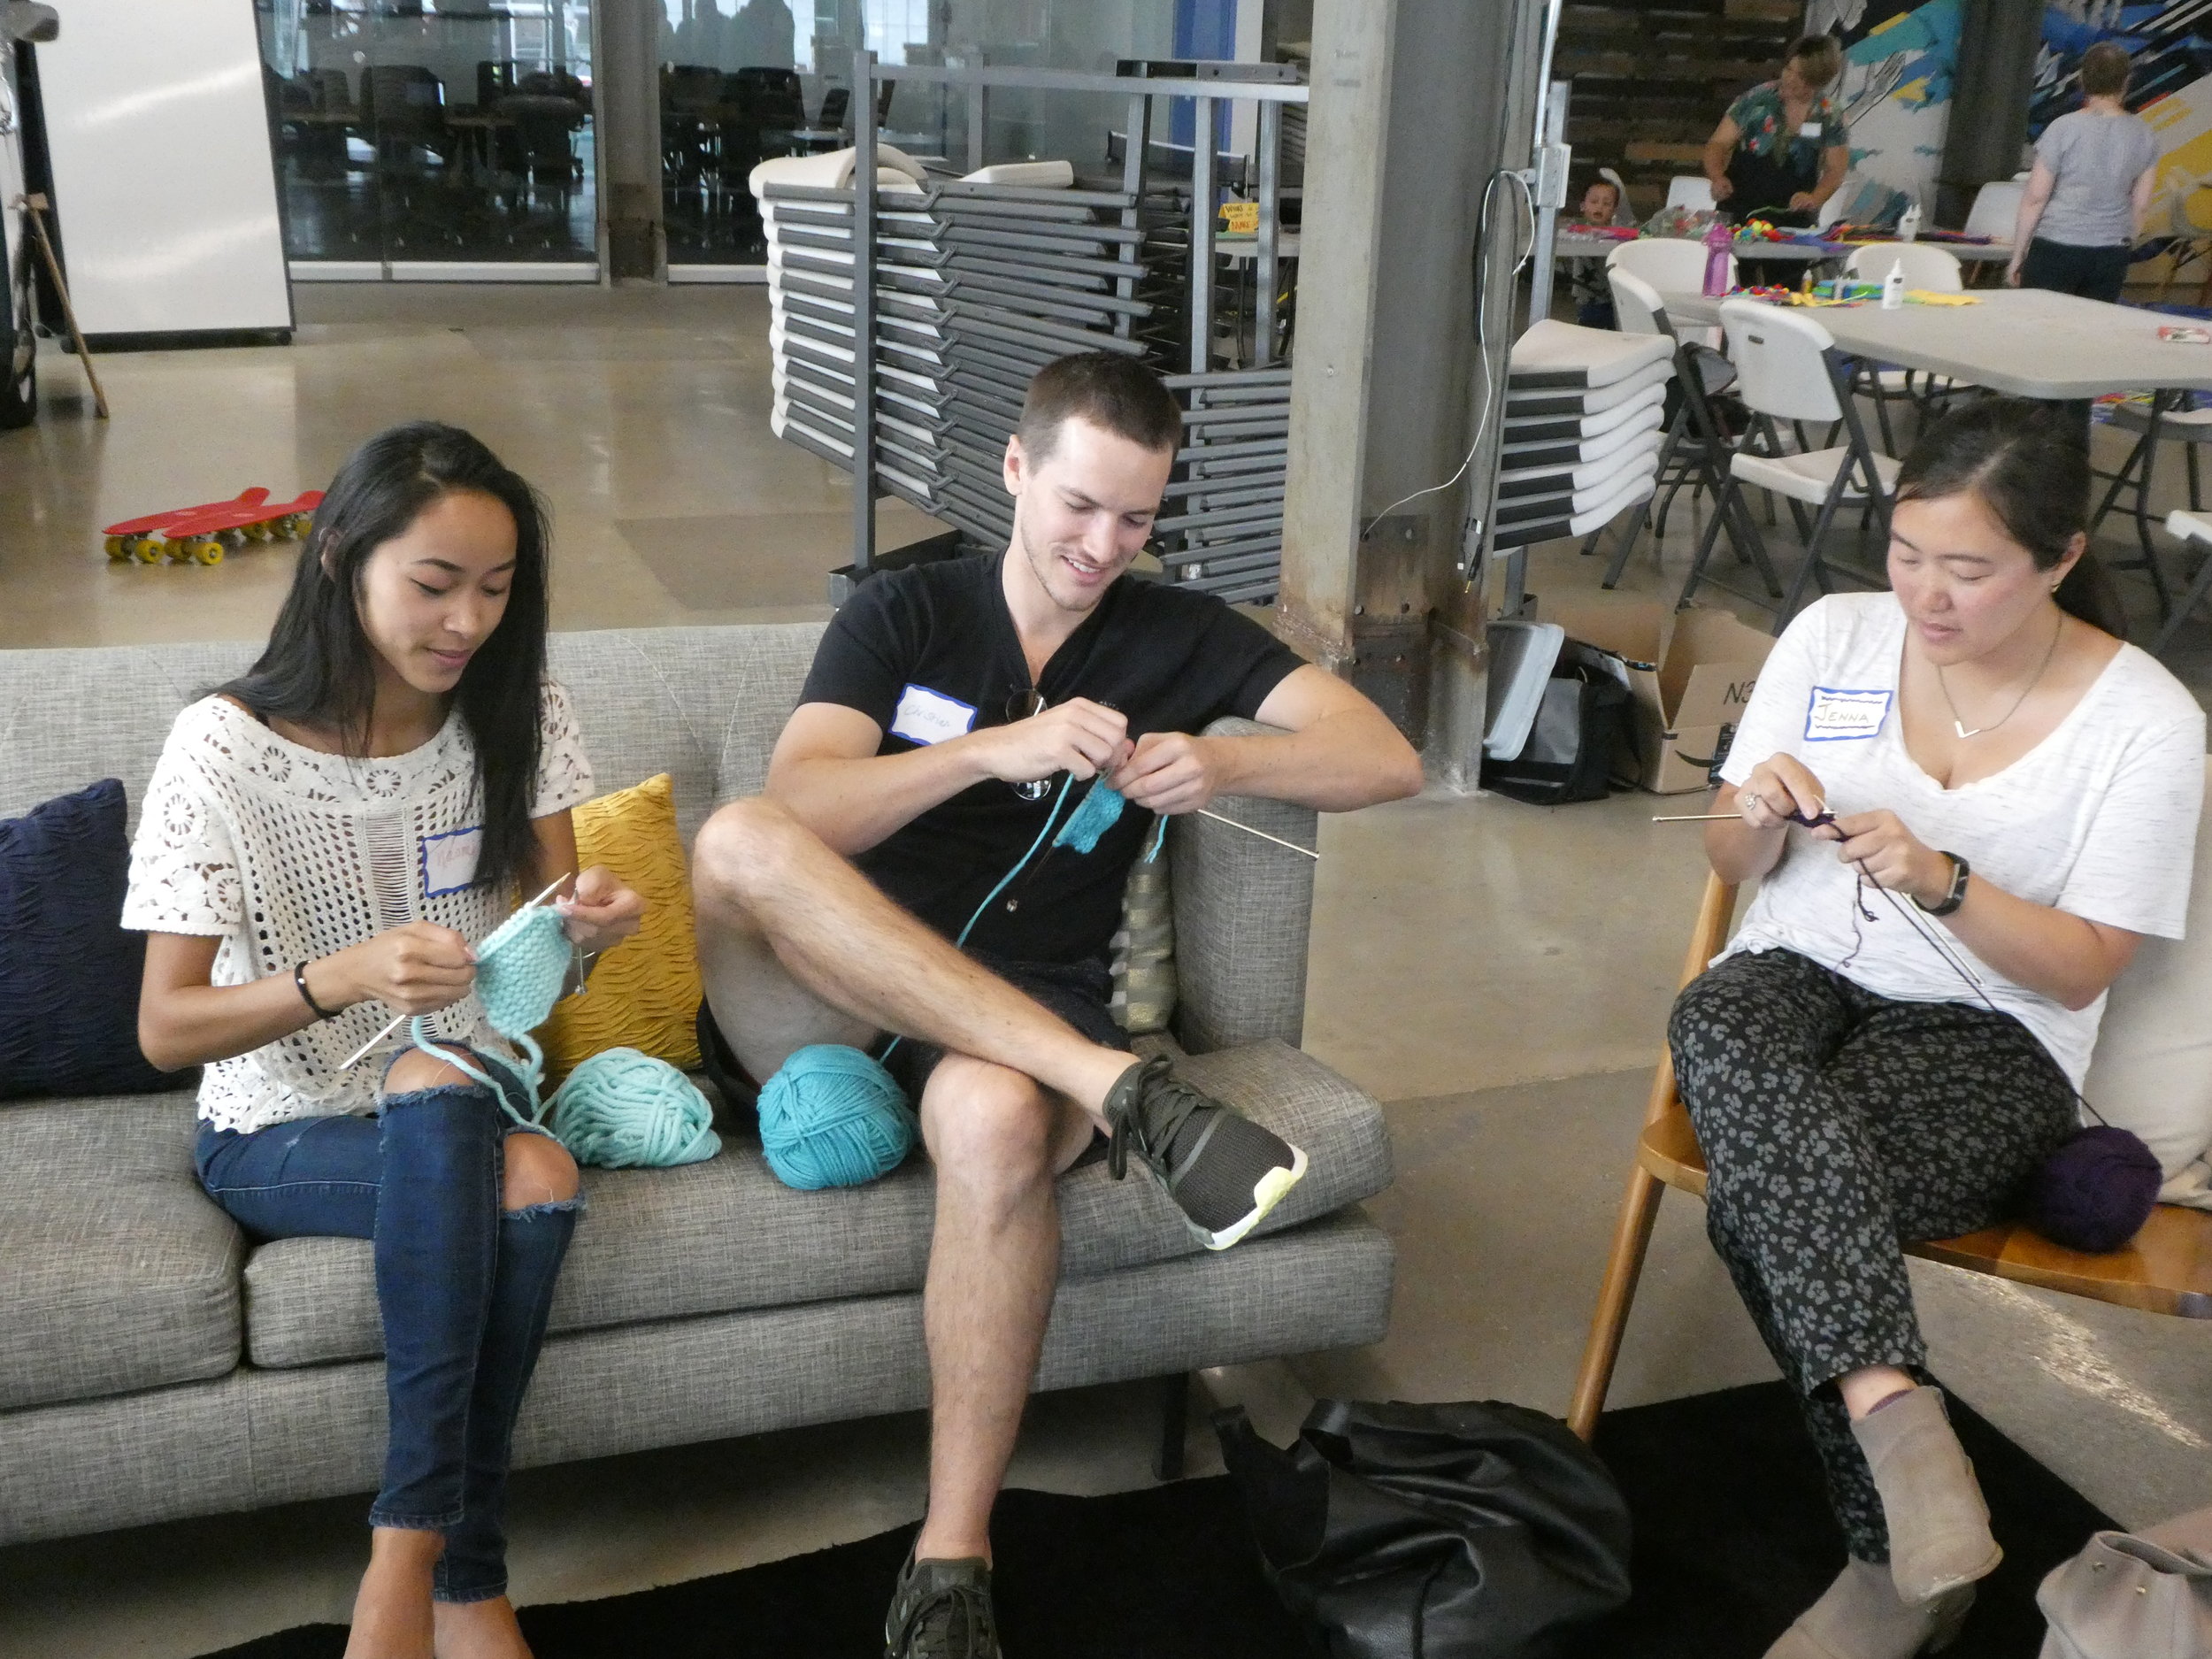 Community knitting event at Code for DC's National Day of Civic Hacking